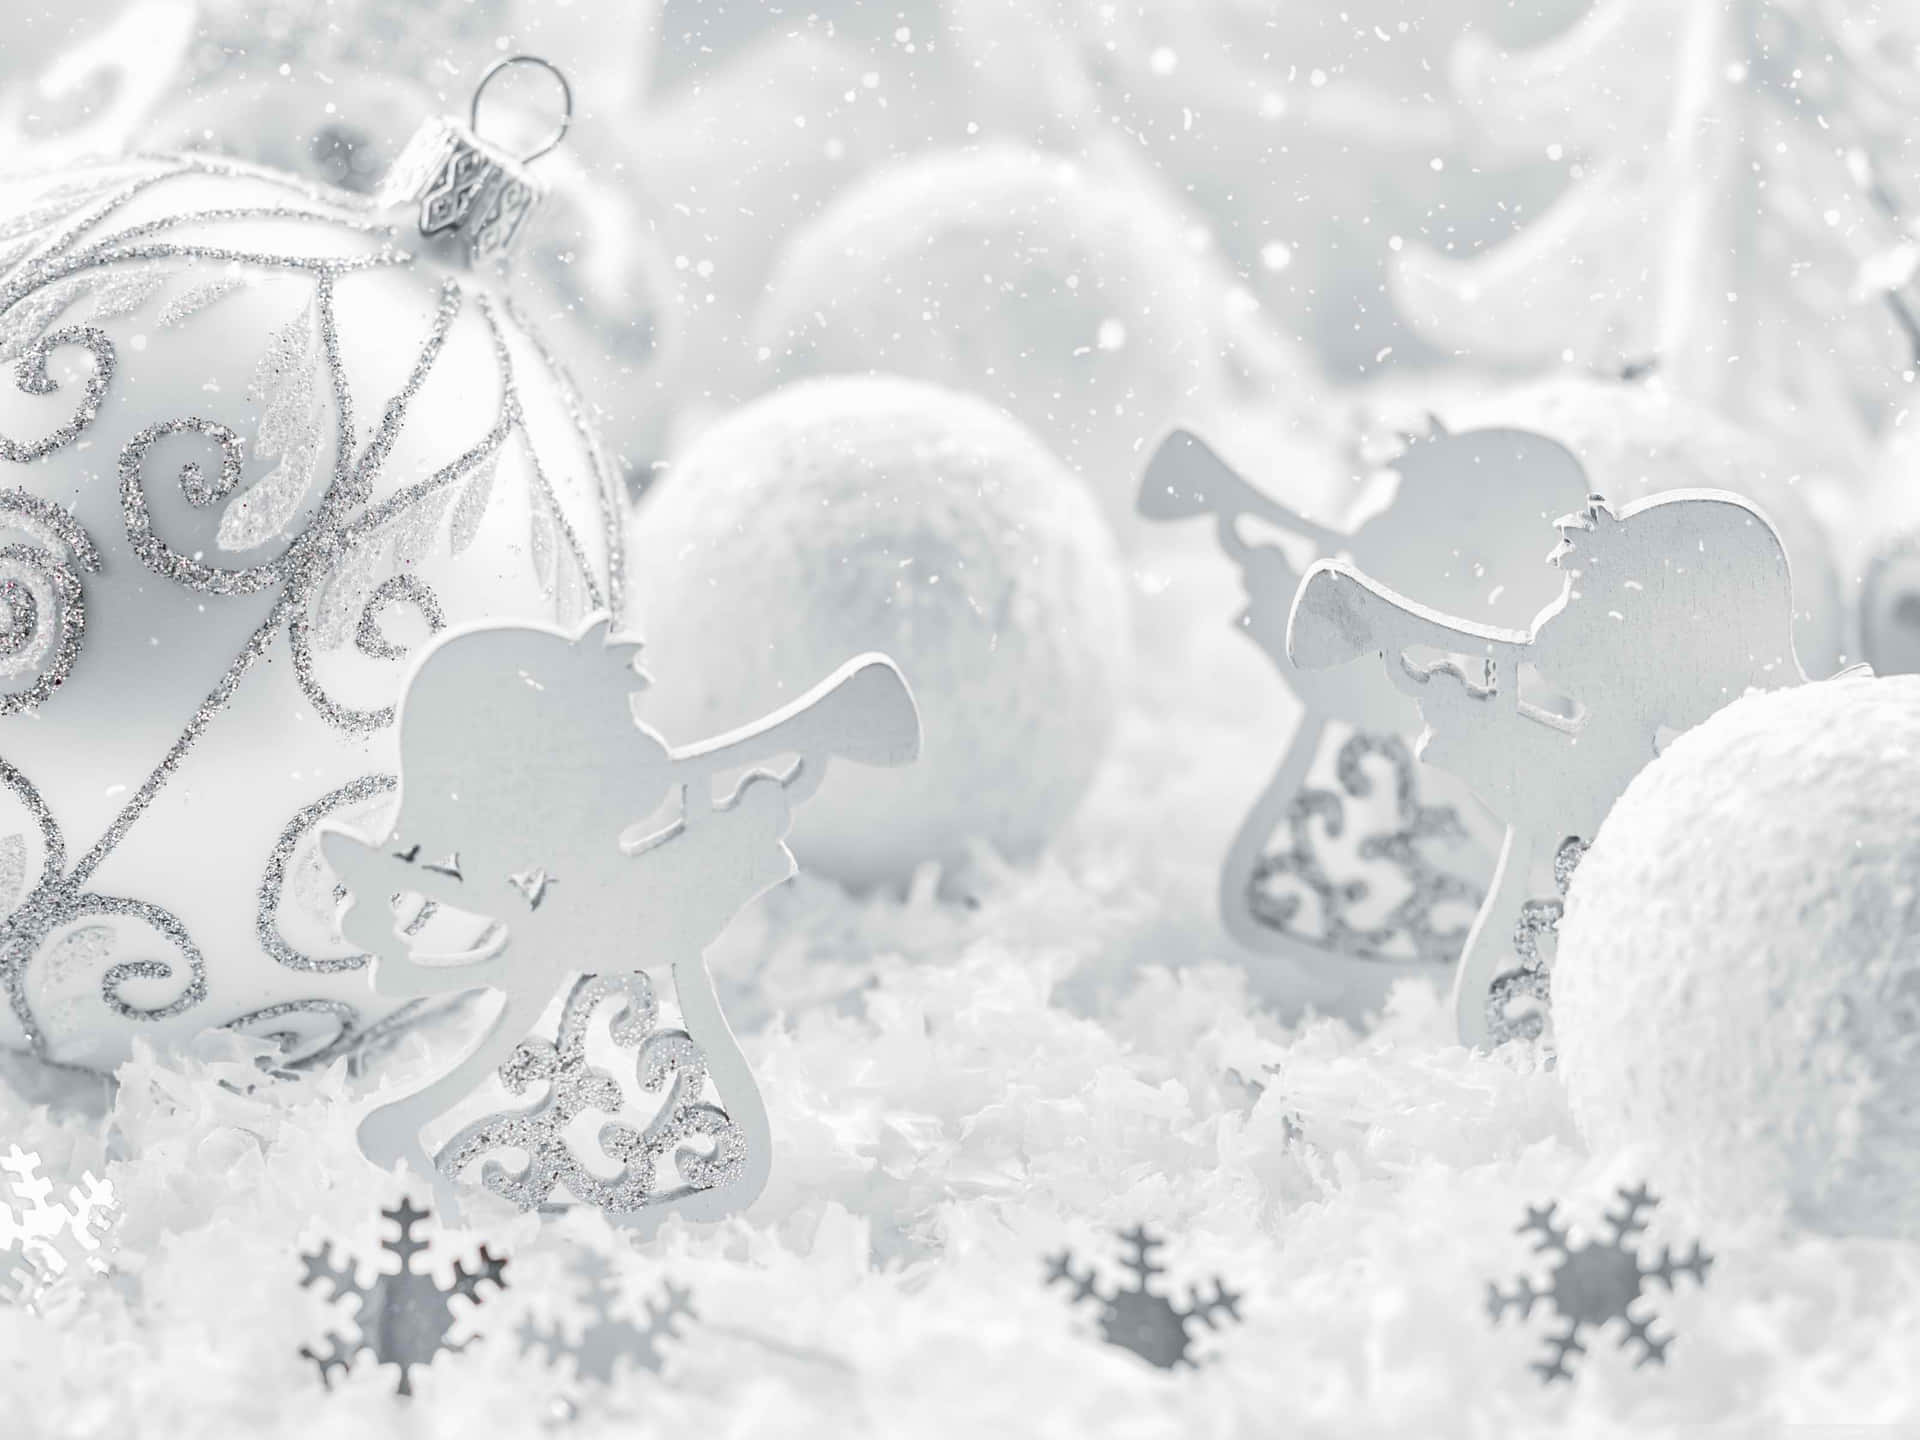 A White Christmas Scene With Ornaments And Snowflakes